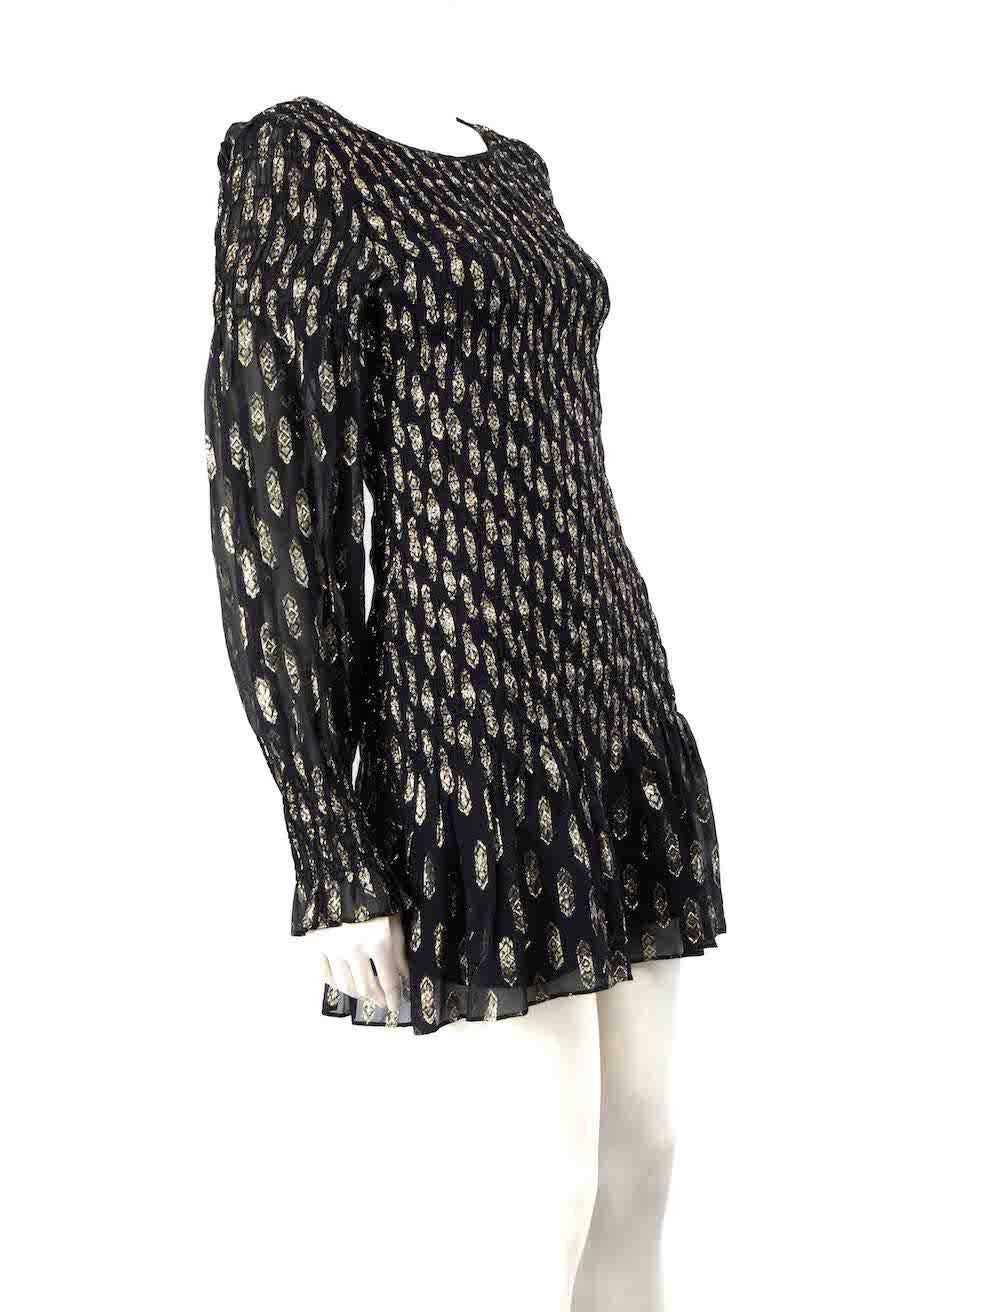 CONDITION is Very good. Hardly any visible wear to dress is evident on this used LoveShackFancy designer resale item.
 
 
 
 Details
 
 
 Navy
 
 Silk
 
 Mini dress
 
 Metallic jacquard pattern
 
 Round neckline
 
 Elasticated waist and cuffs
 
